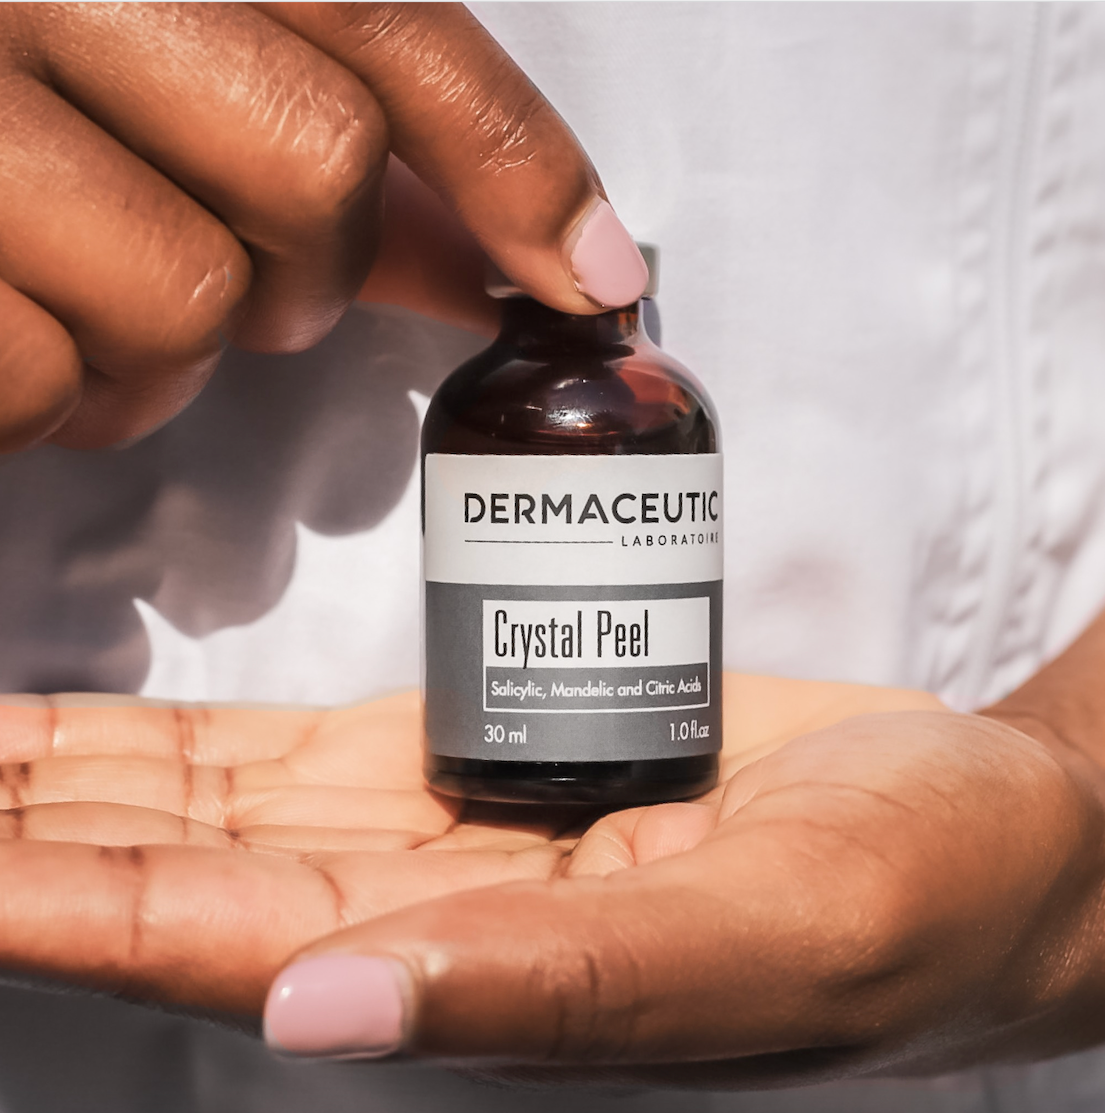 colored hands holding a bottle of A bottle of Dermaceutic Laboratoire Crystal Peel 30ml